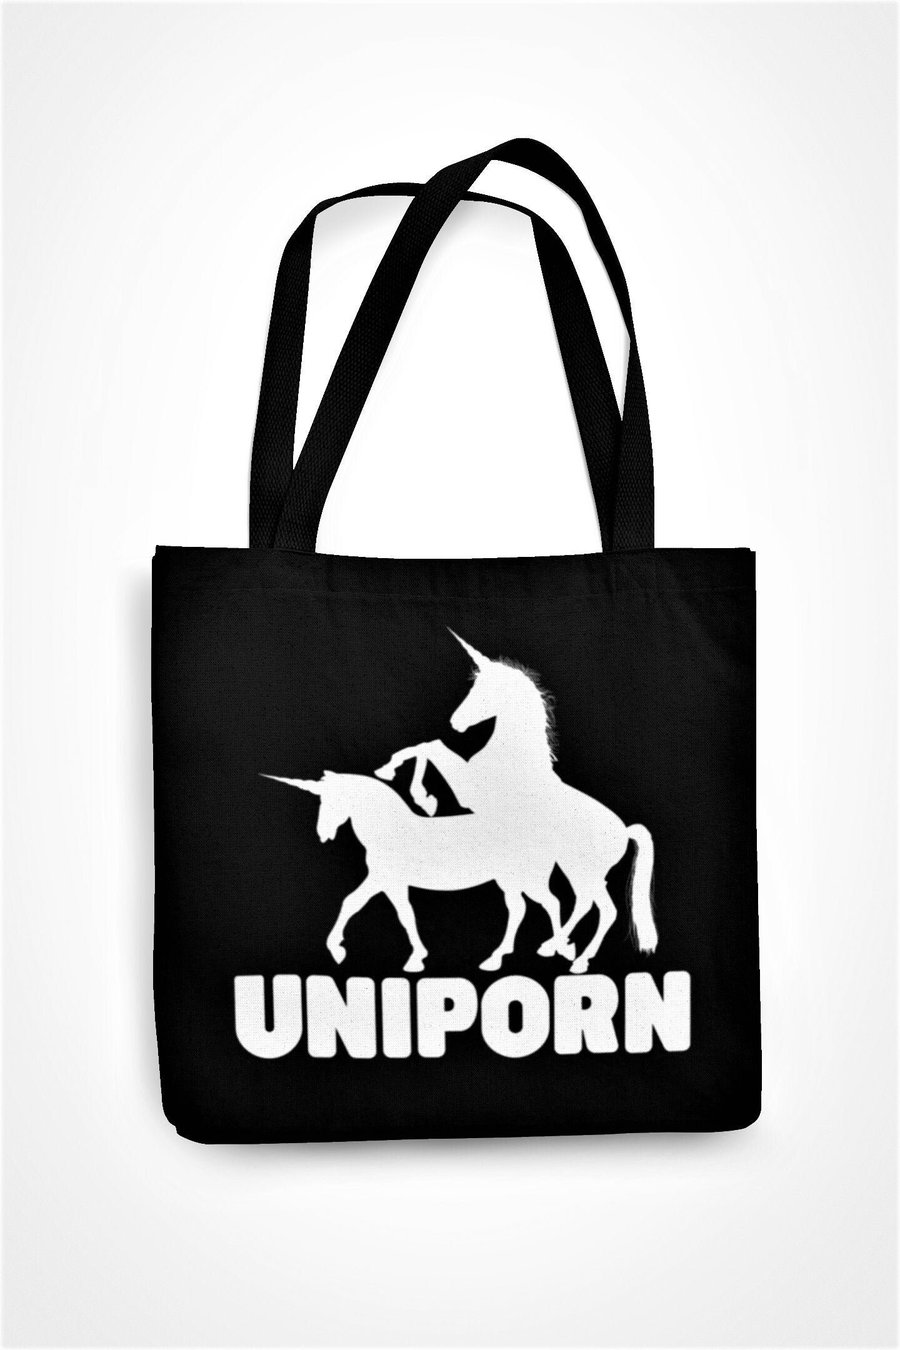 Uniporn Tote Bag Rude Funny Novelty Gift Joke Present Adult Humour For Family 